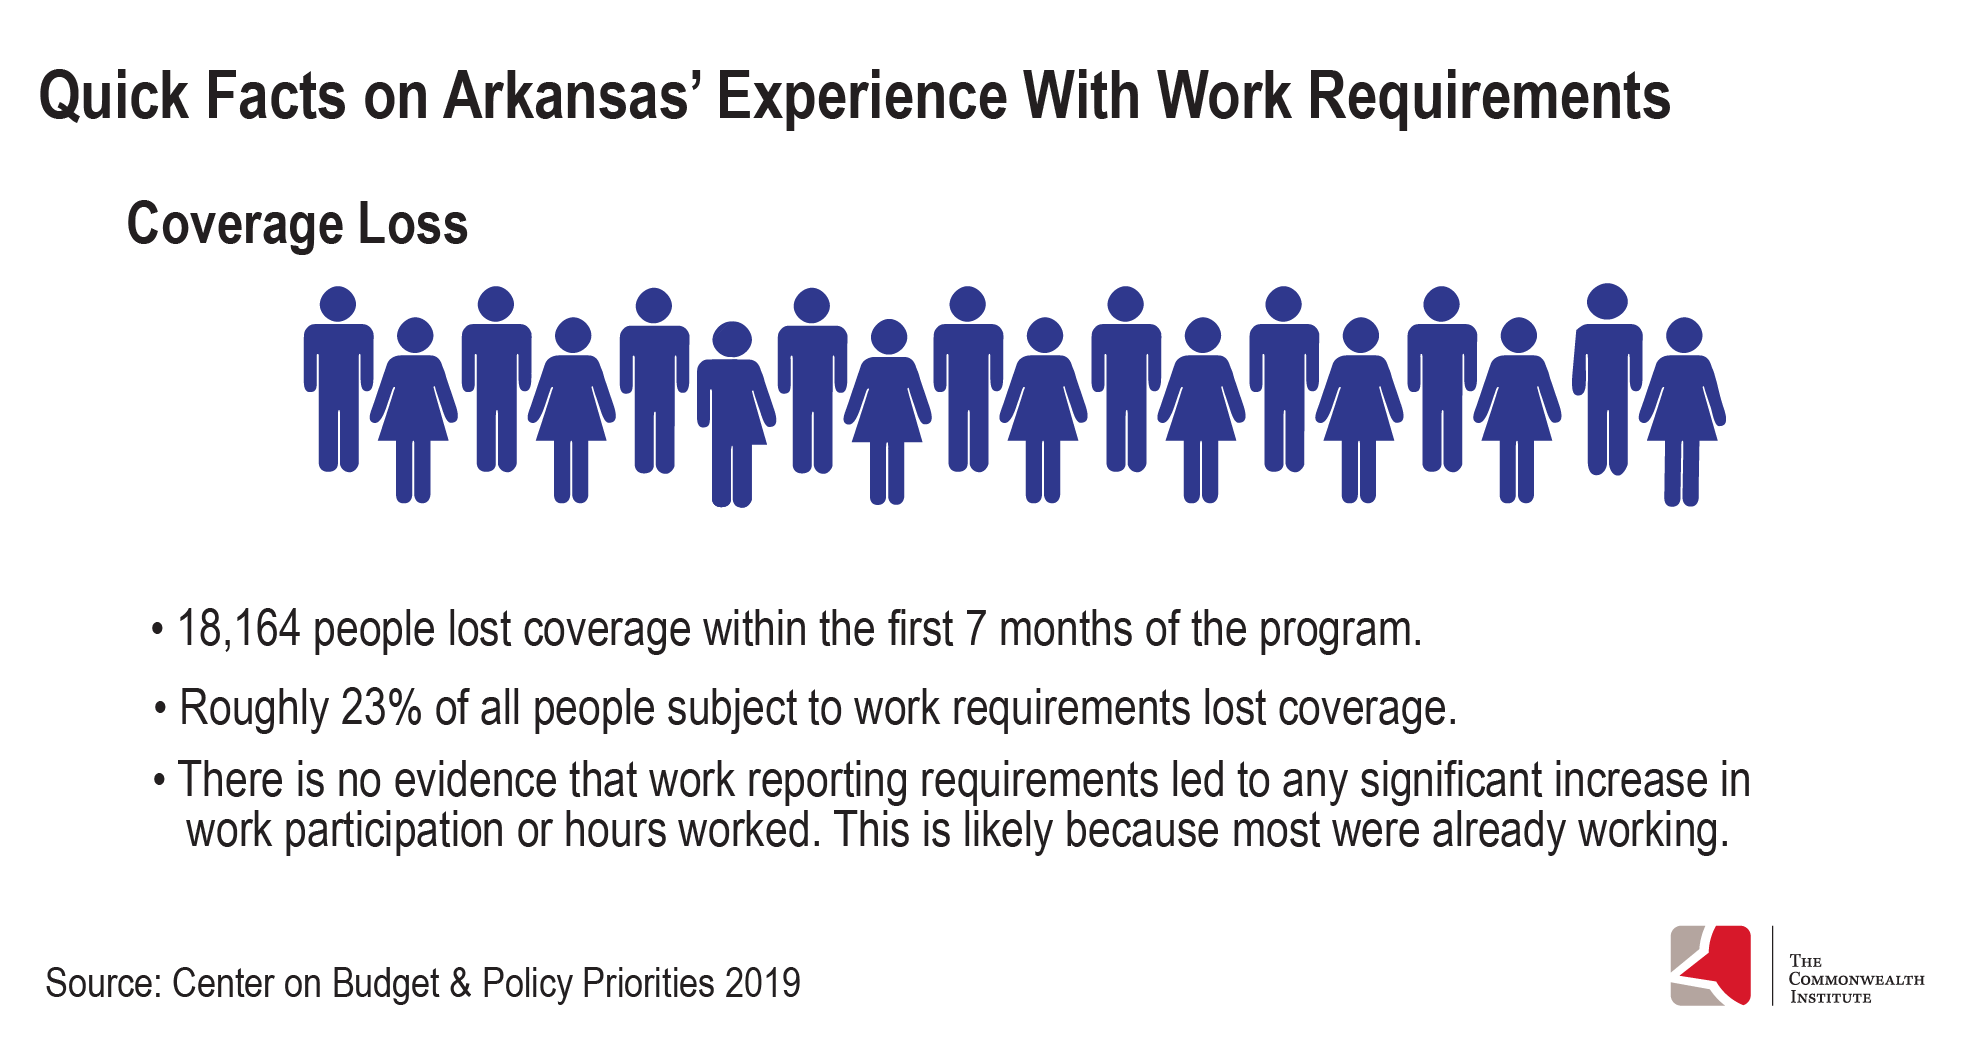 Graphic sharing facts on the health coverage loss in Arkansas due to work reporting requirements based on analysis by the Center on Budget and Policy Priorities